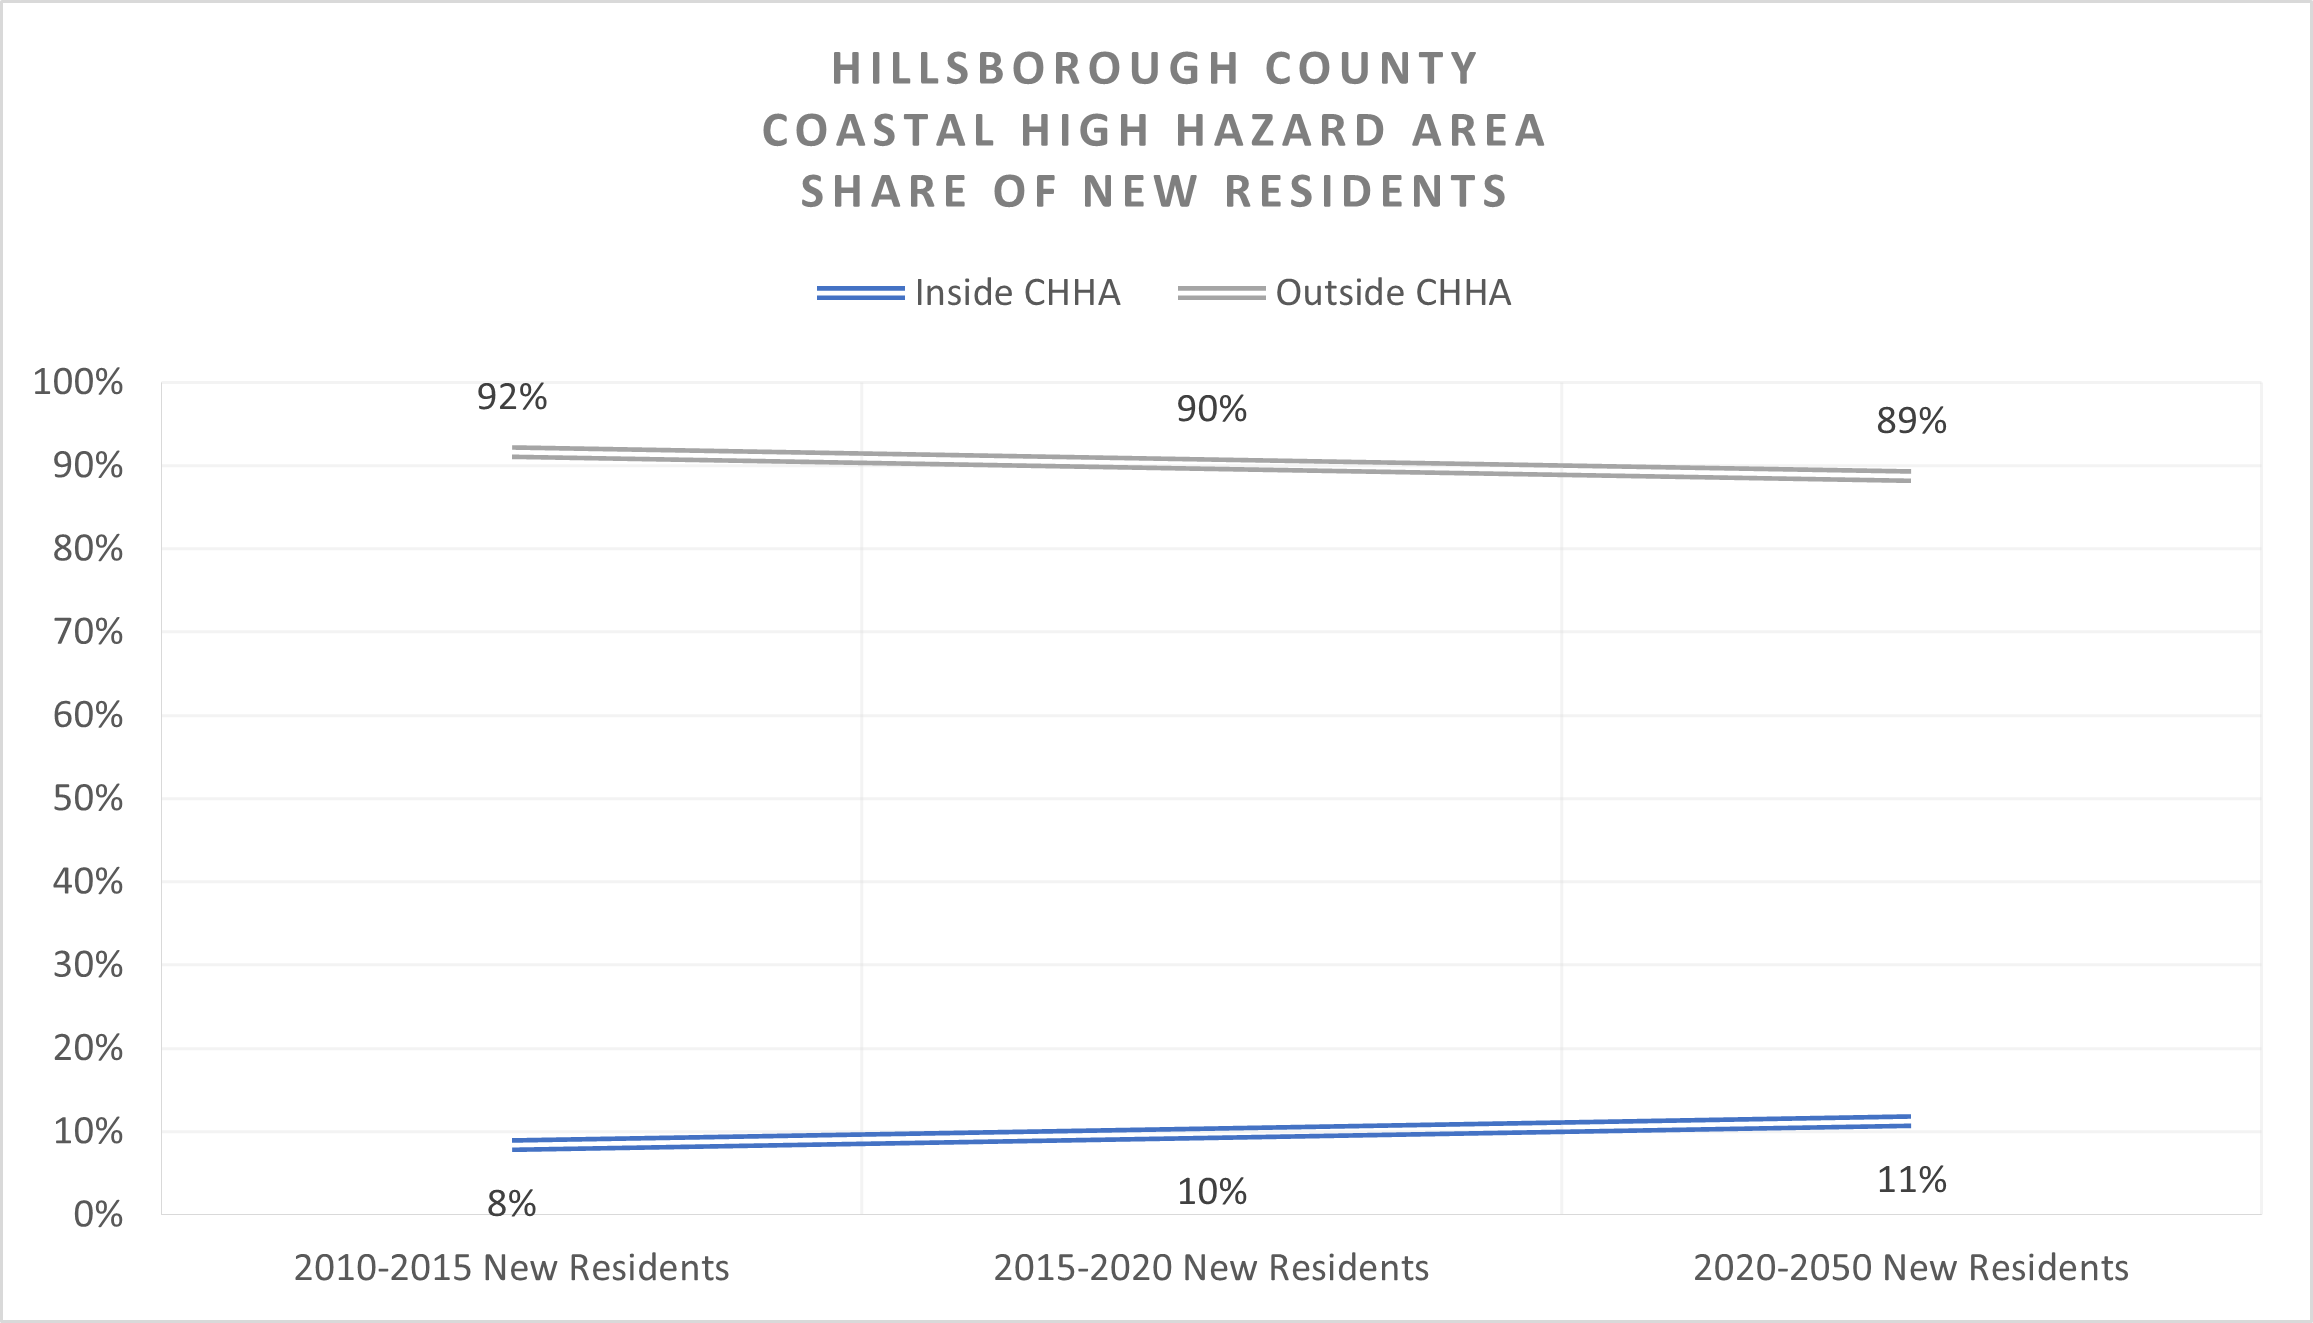 This chart shows Hillsborough County's share of new resident inside and outside the CHHA. From 2015 to 2020, 10% of the new residents moved inside the CHHA and 90% of the new residents moved outside CHHA. From 2020 to 2050, the share of new residents inside CHHA is expected to decrease slightly. Namely, 11% of the new residents are expected to move inside the CHHA and 89% of the county's new residents are expected to move outside CHHA.